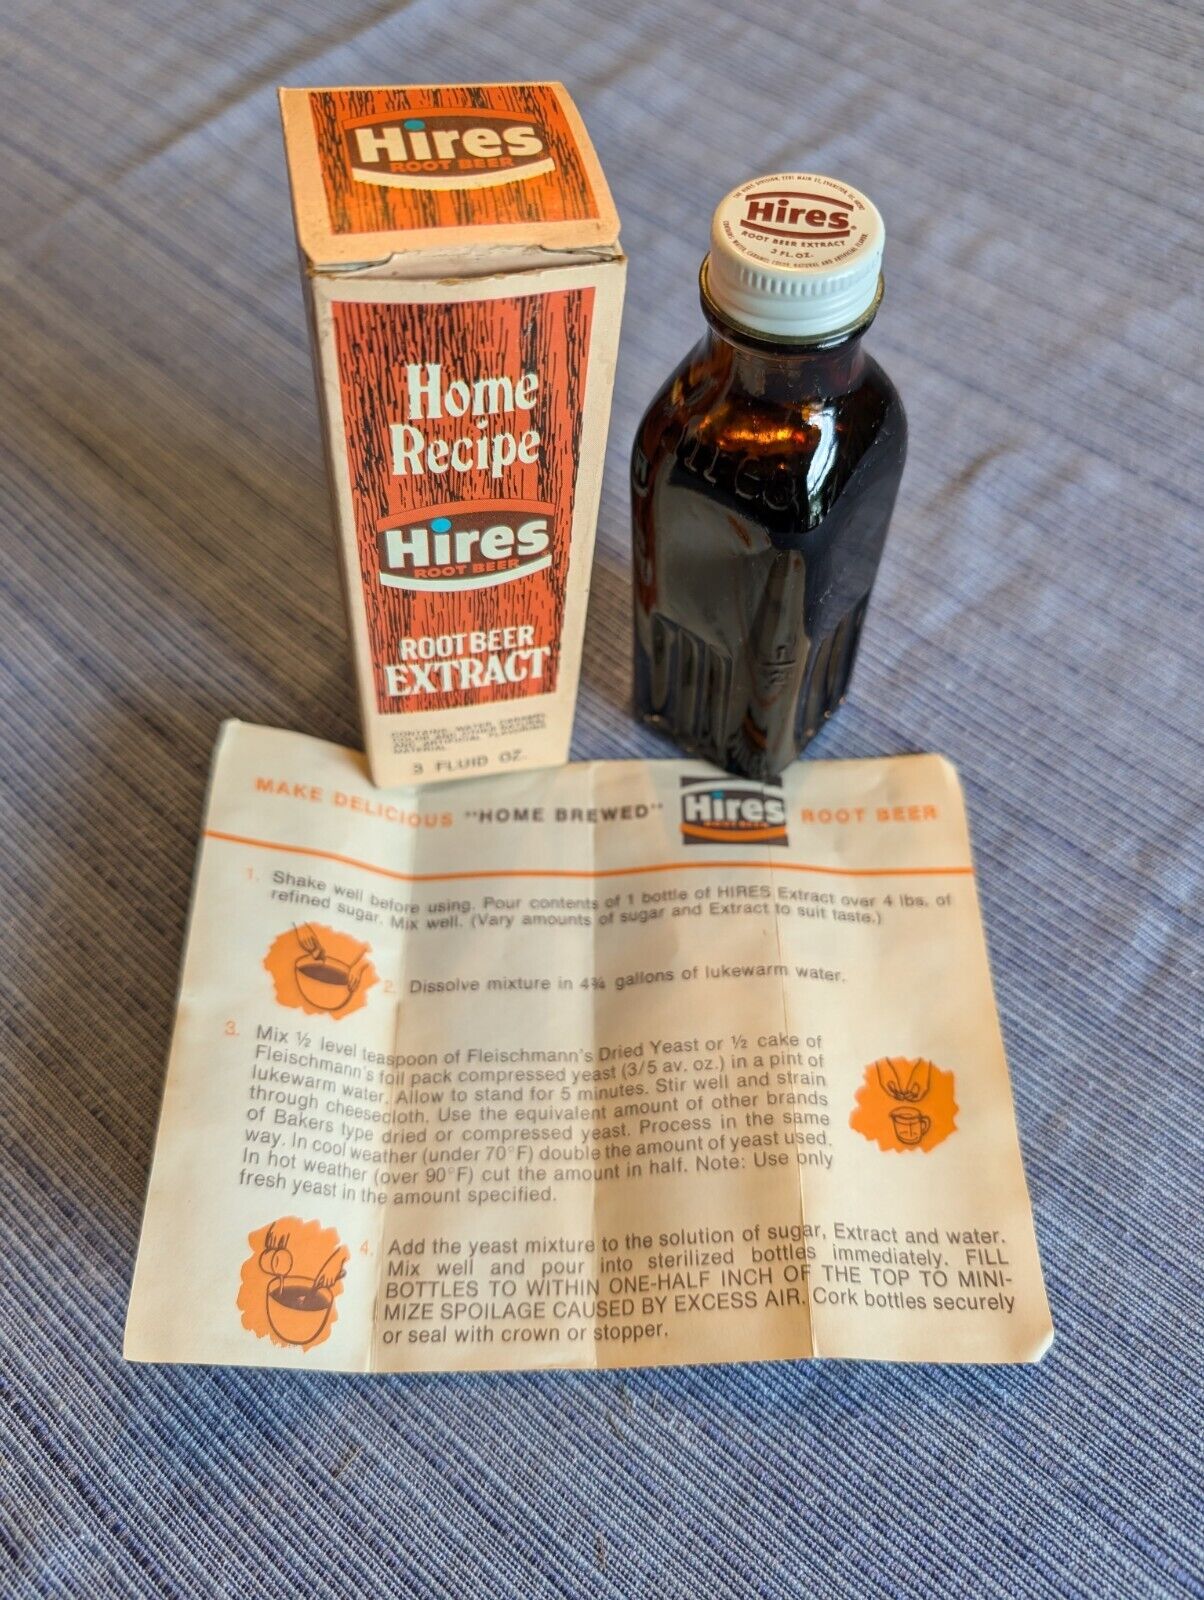 Vintage Hires Root Beer Extract 3 oz. Bottle, Original Box & Instructions